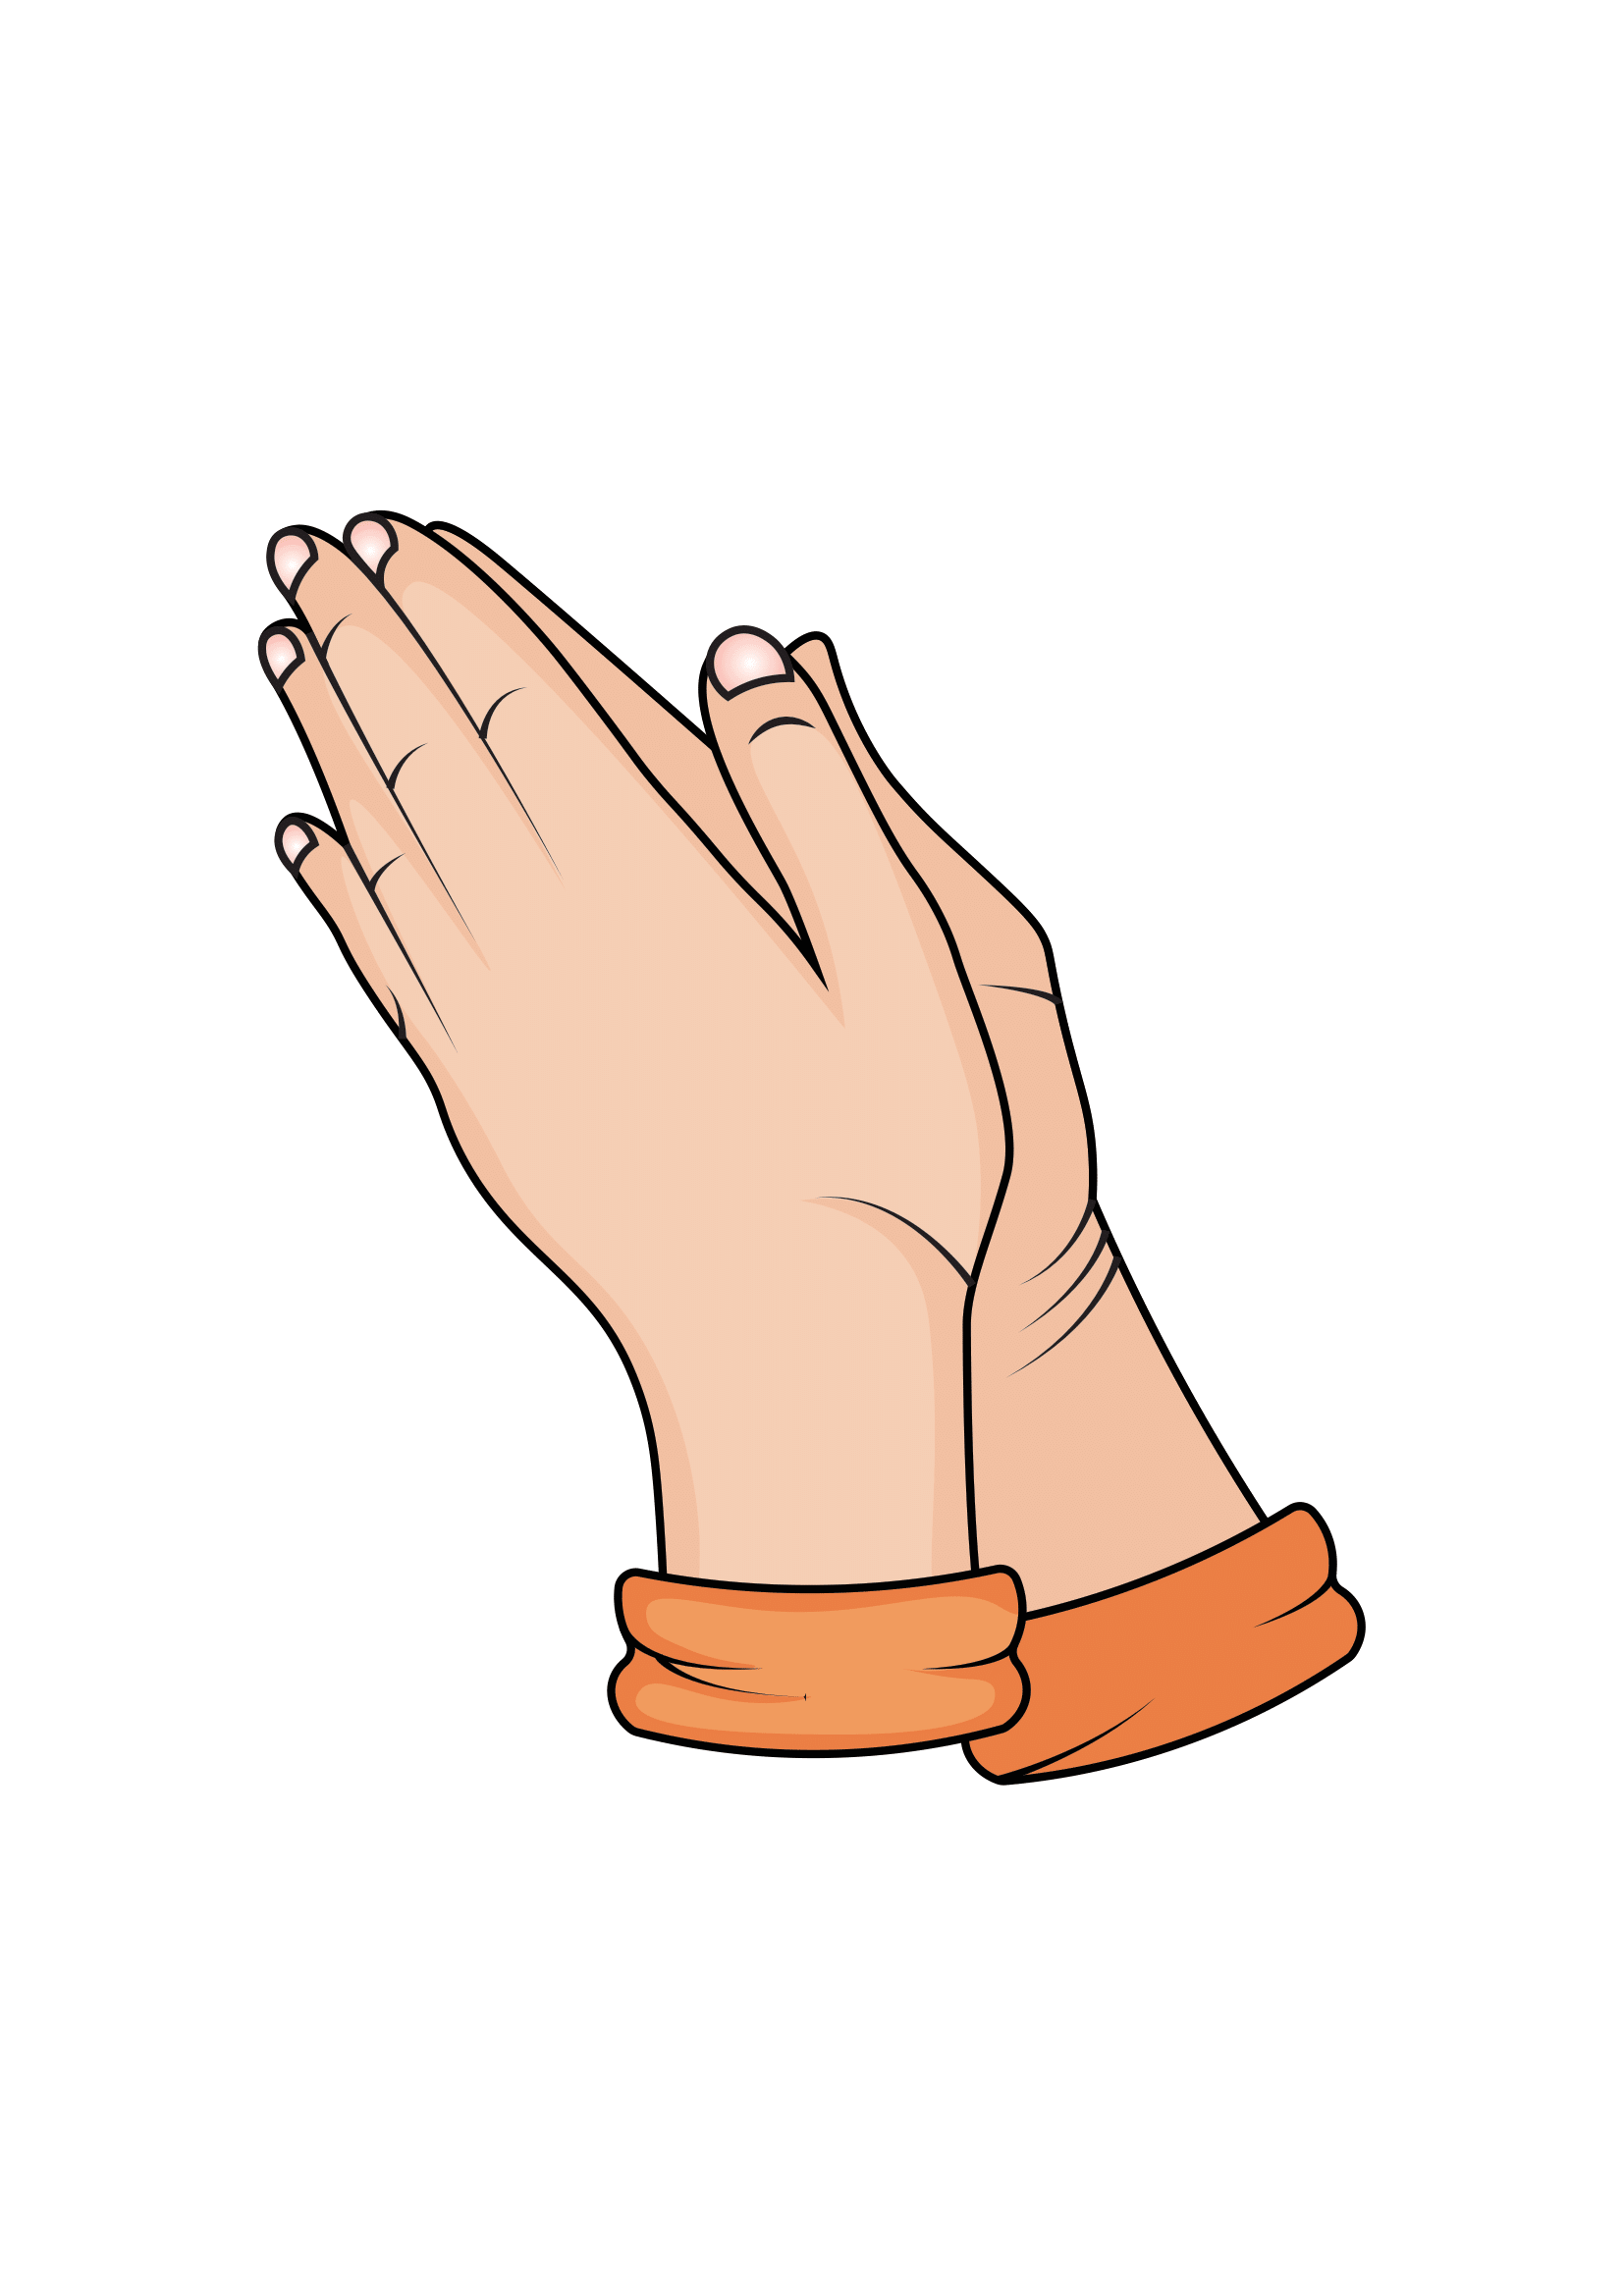 How to Draw Praying Hands Step by Step Printable